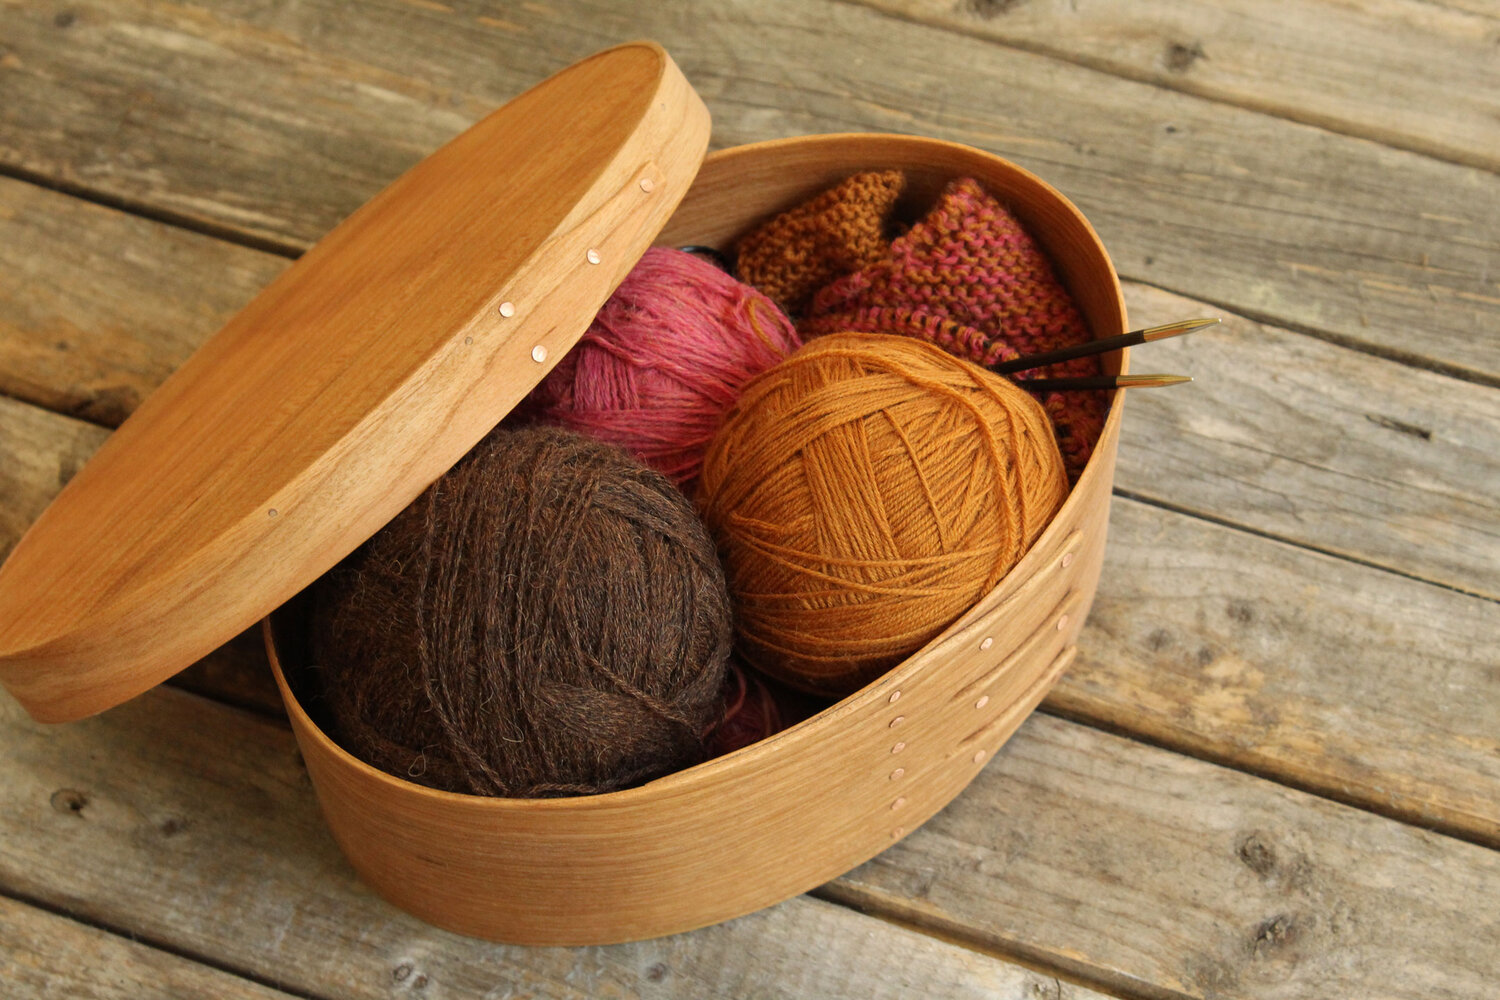 Wooden Boxes - The Woolen Needle